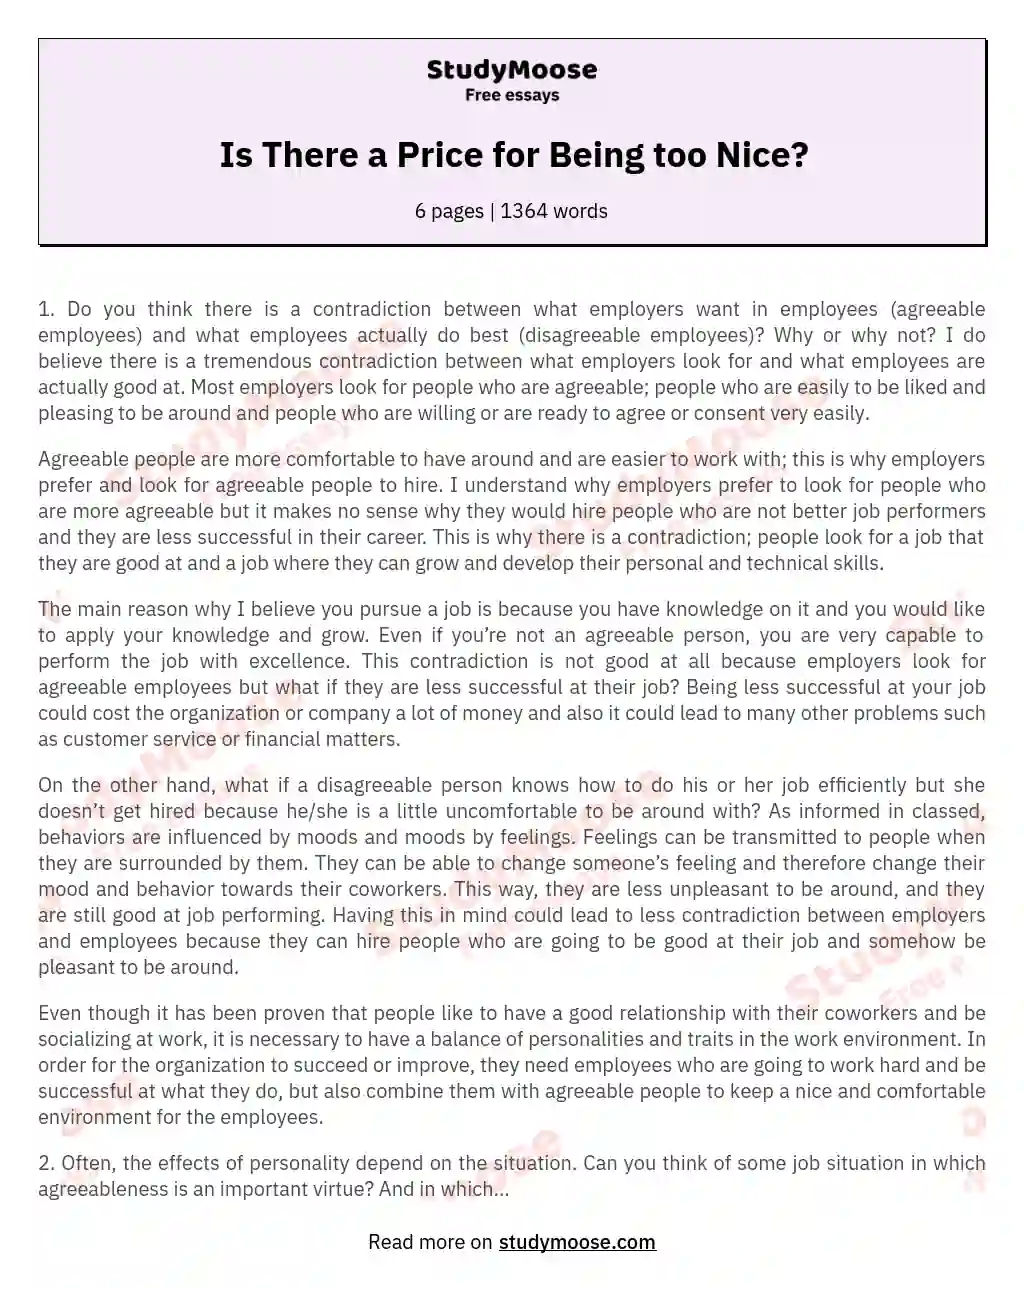 Is There a Price for Being too Nice?